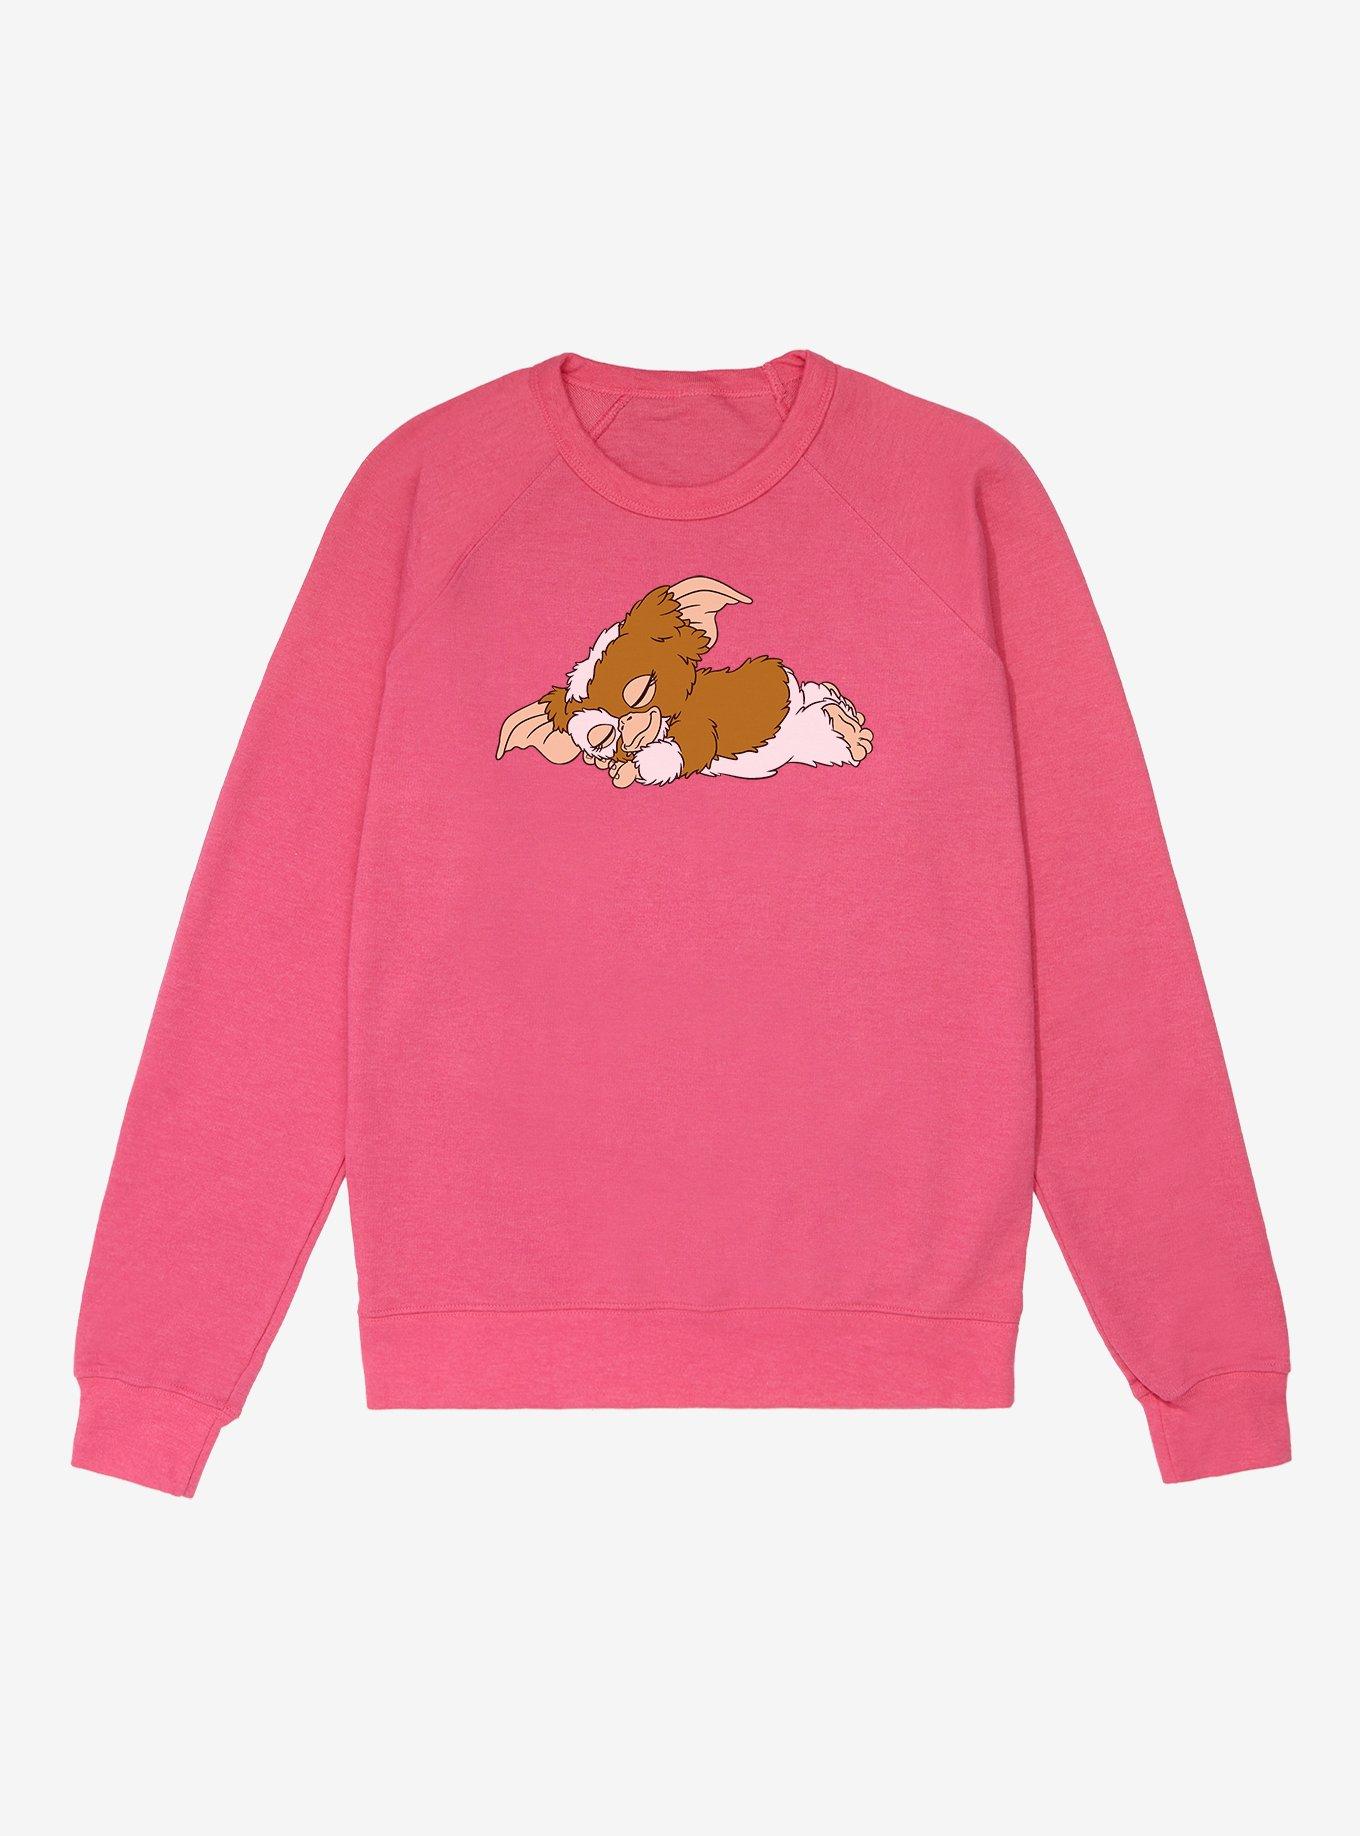 Gremlins Napping Gizmo French Terry Sweatshirt, HELICONIA HEATHER, hi-res